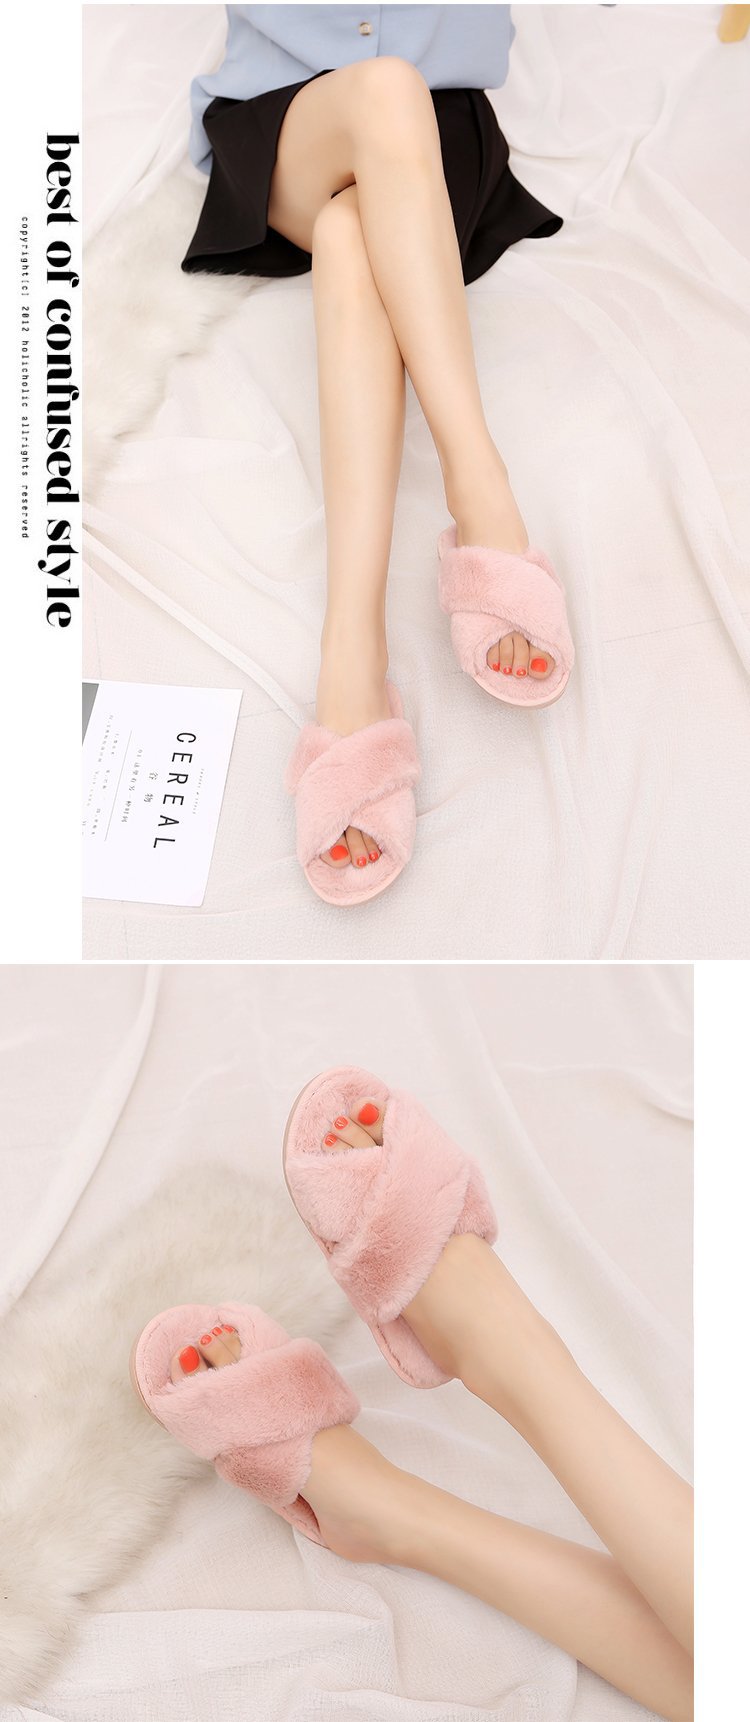 women s home furry cotton slippers nihaostyles clothing wholesale NSKJX71190